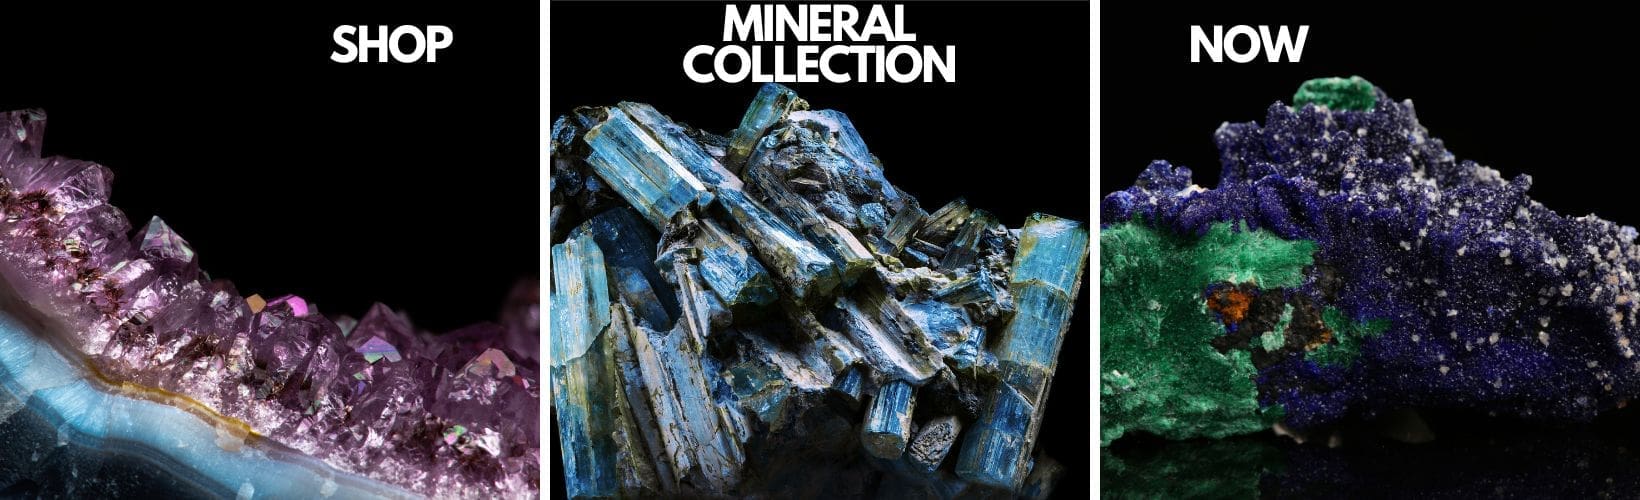 Mineral Collection Banner